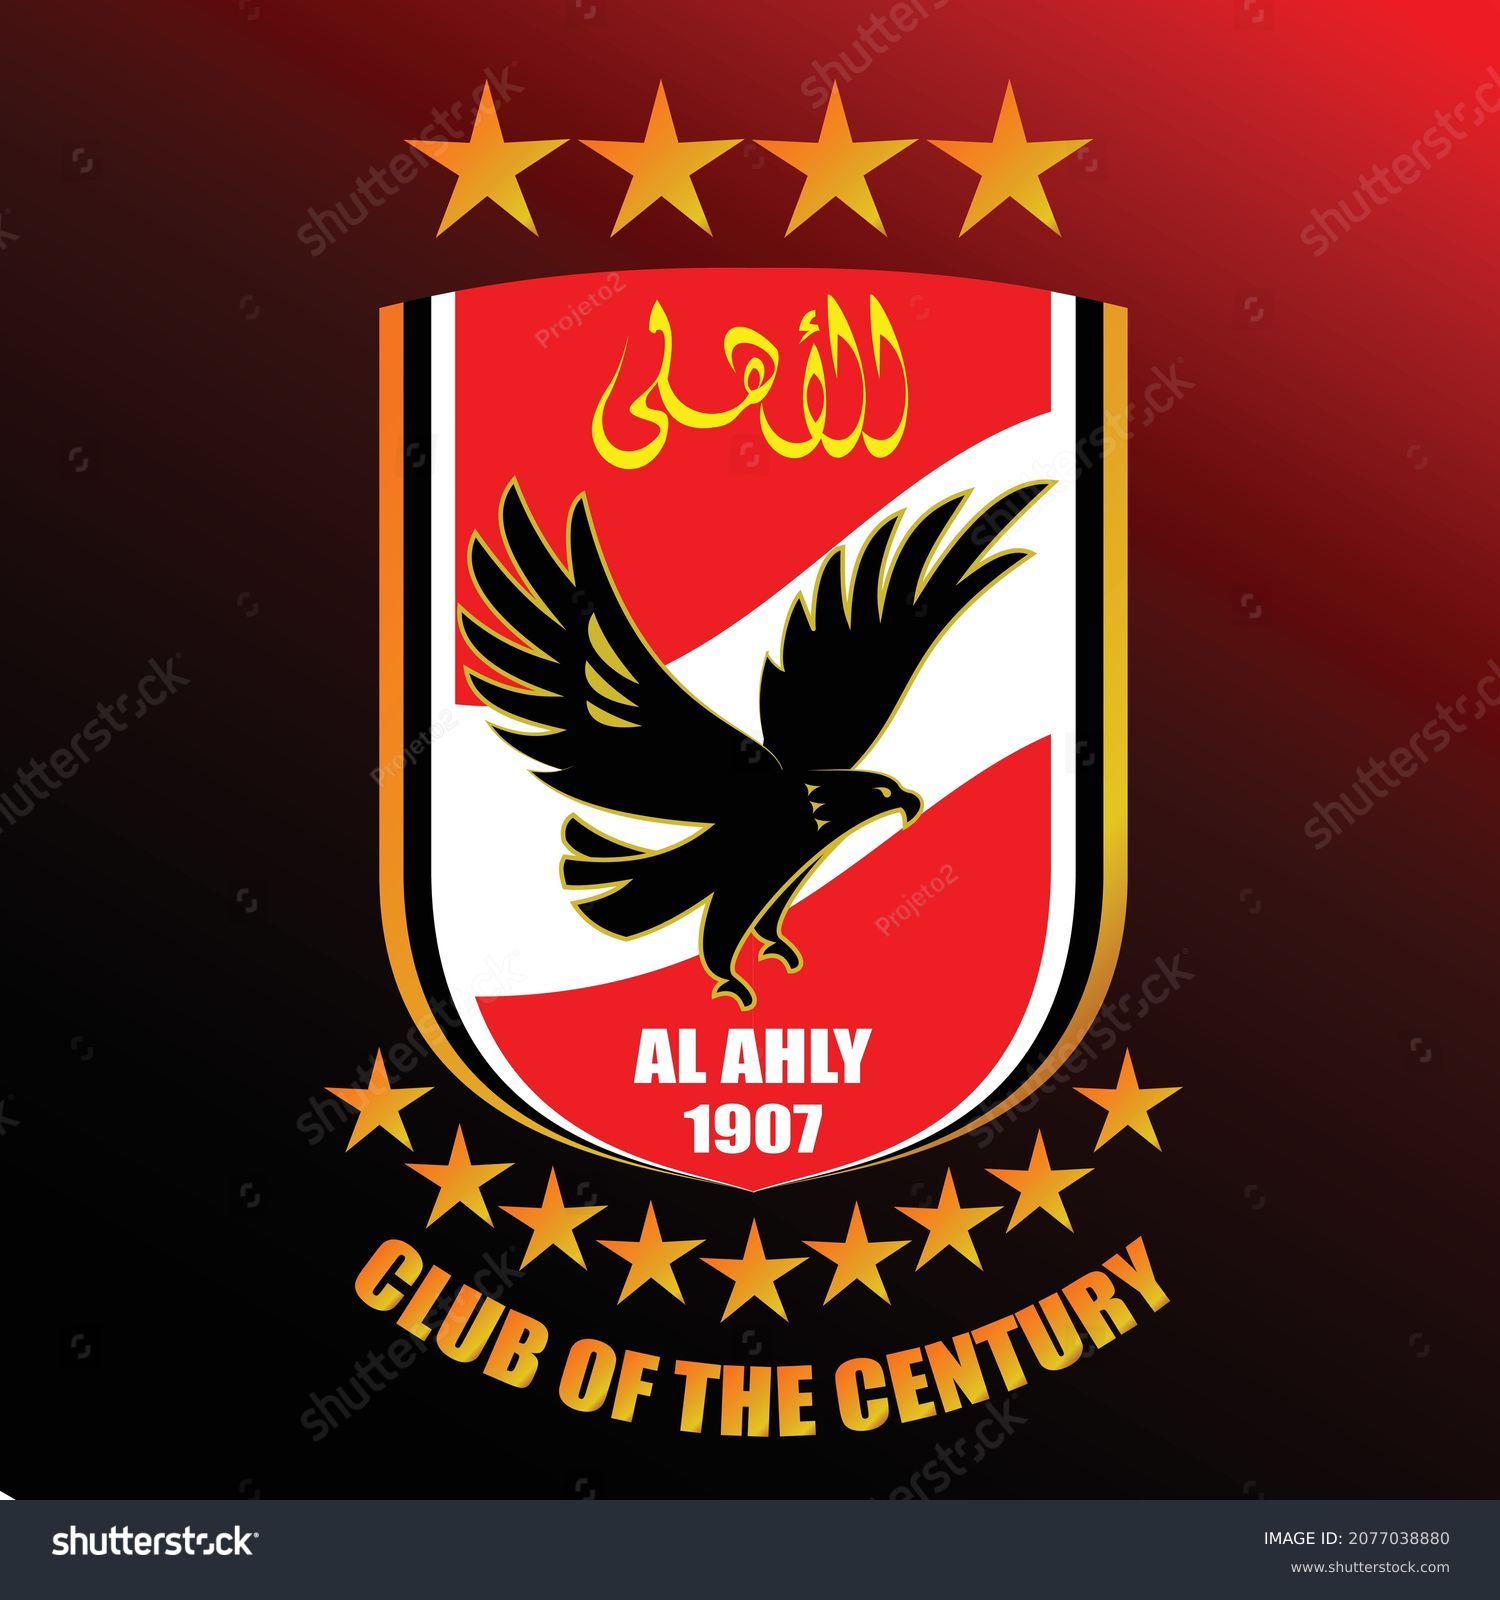 SVG of The logo of Al Ahly club which is the century club ,the red flag with an eagle in the middle . svg